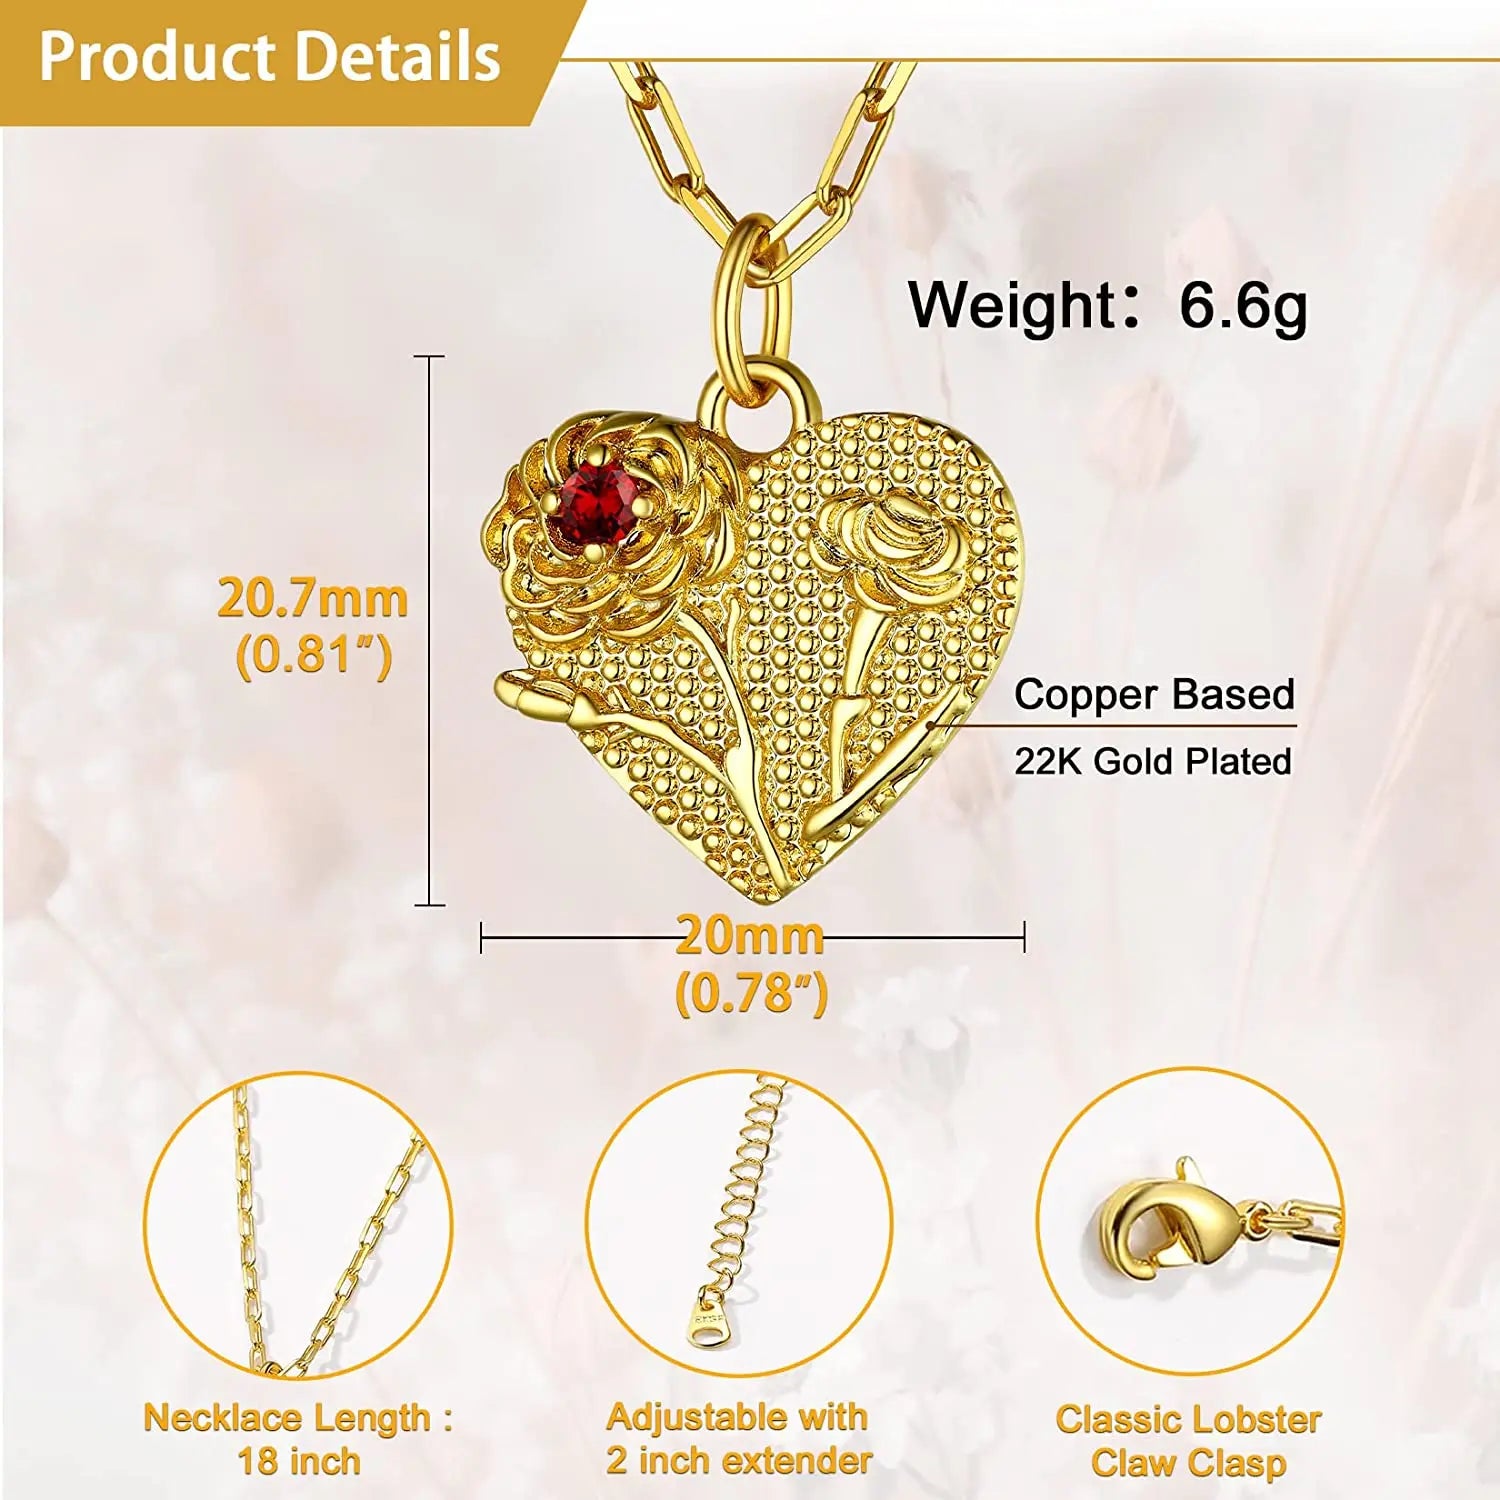 Exquisite 12 Months Birthstone 3D Embossed Rose Heart Flower Shape Necklace for Women and Girls